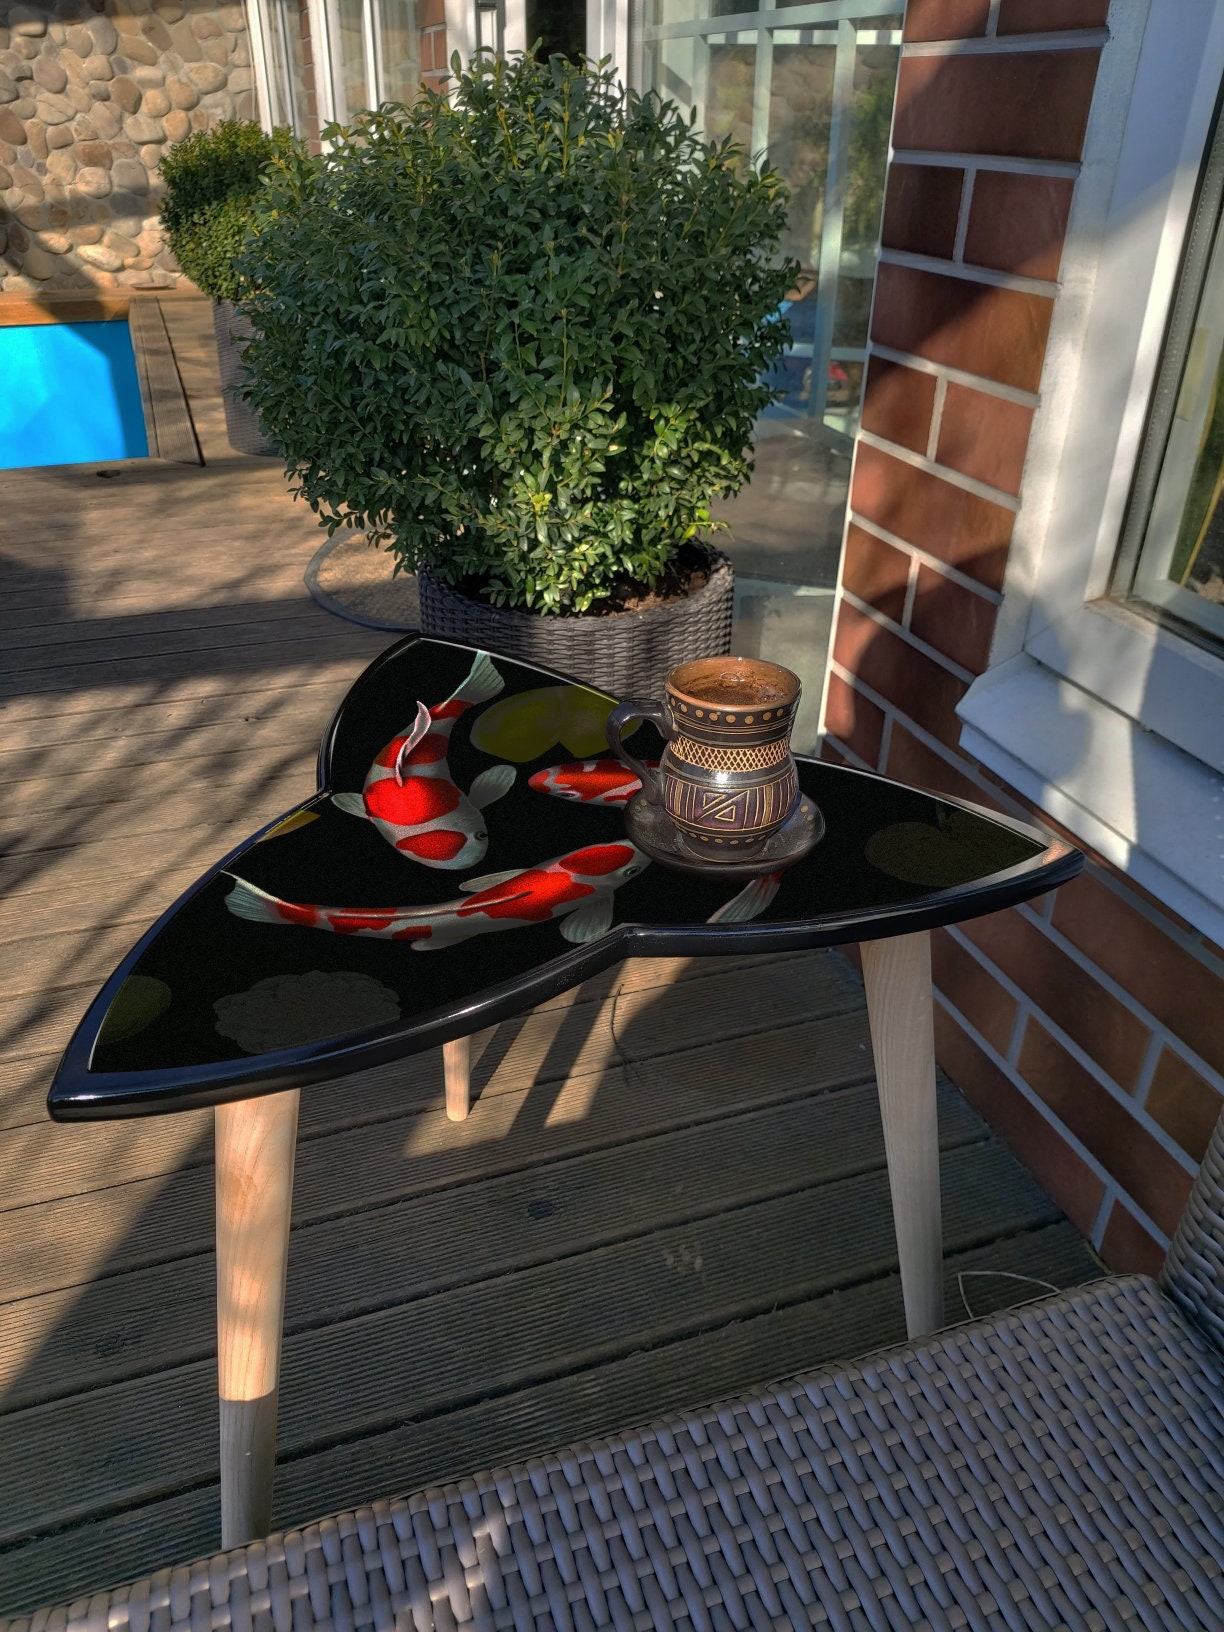 Surfboard Triangular Coffee Table with KOI Fish in Japan Style